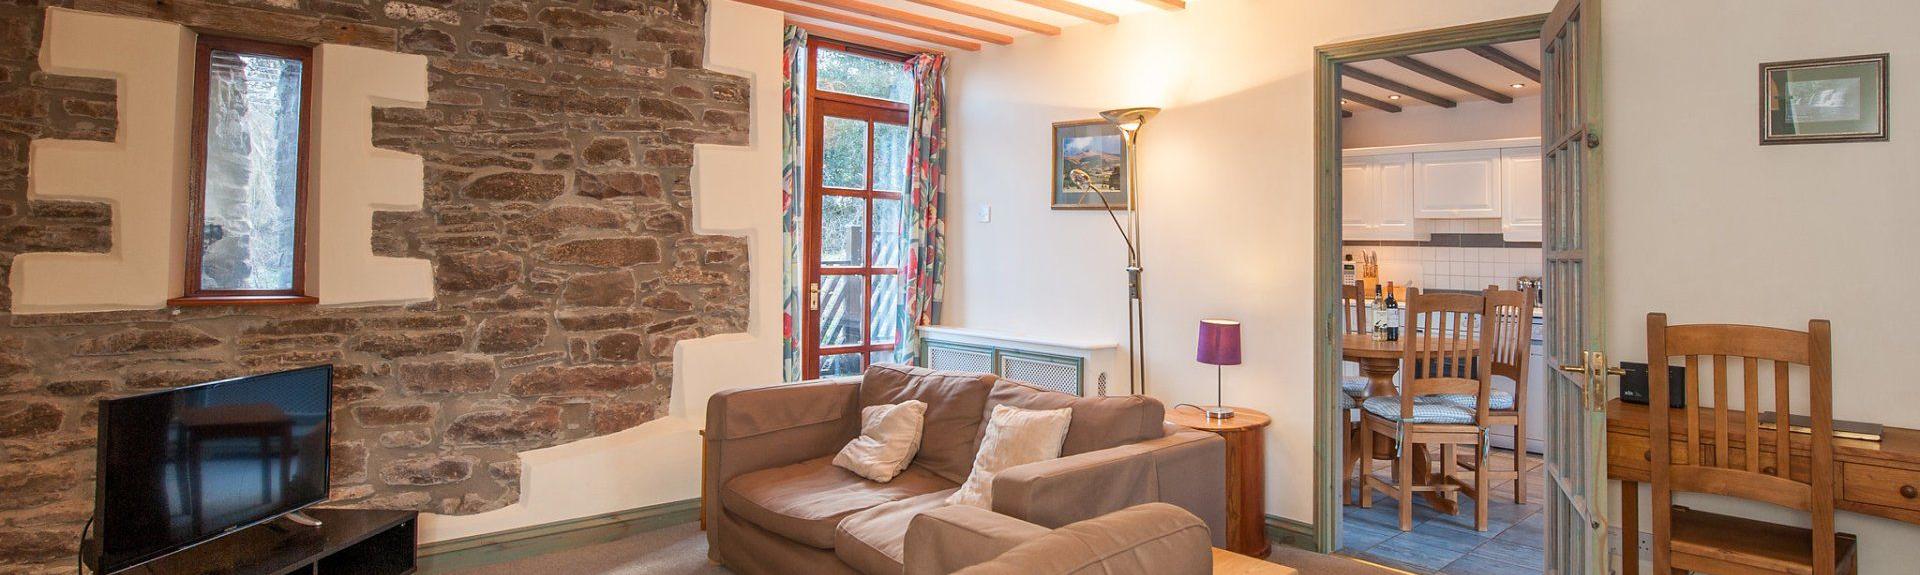 A holiday cottage lounge with exposed stone walls, pine beams and comfortable sofas.